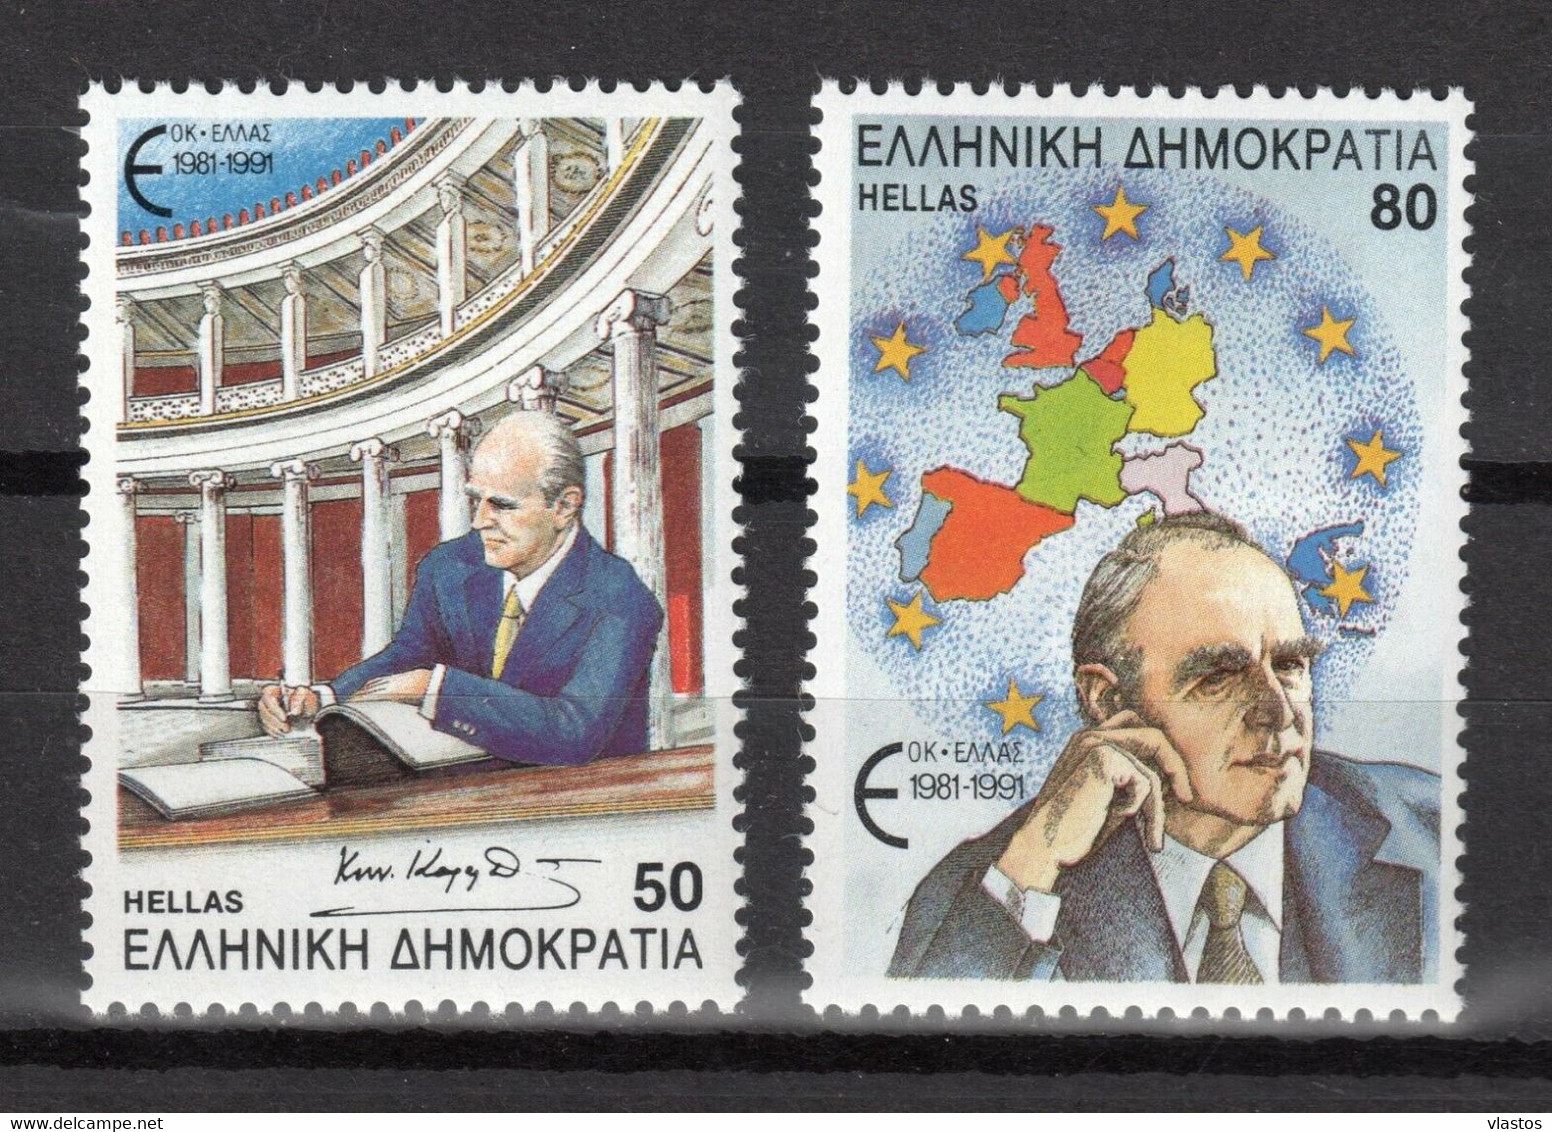 GREECE 1991 COMPLETE YEAR - PERFORATED + IMPERFORATE STAMPS MNH